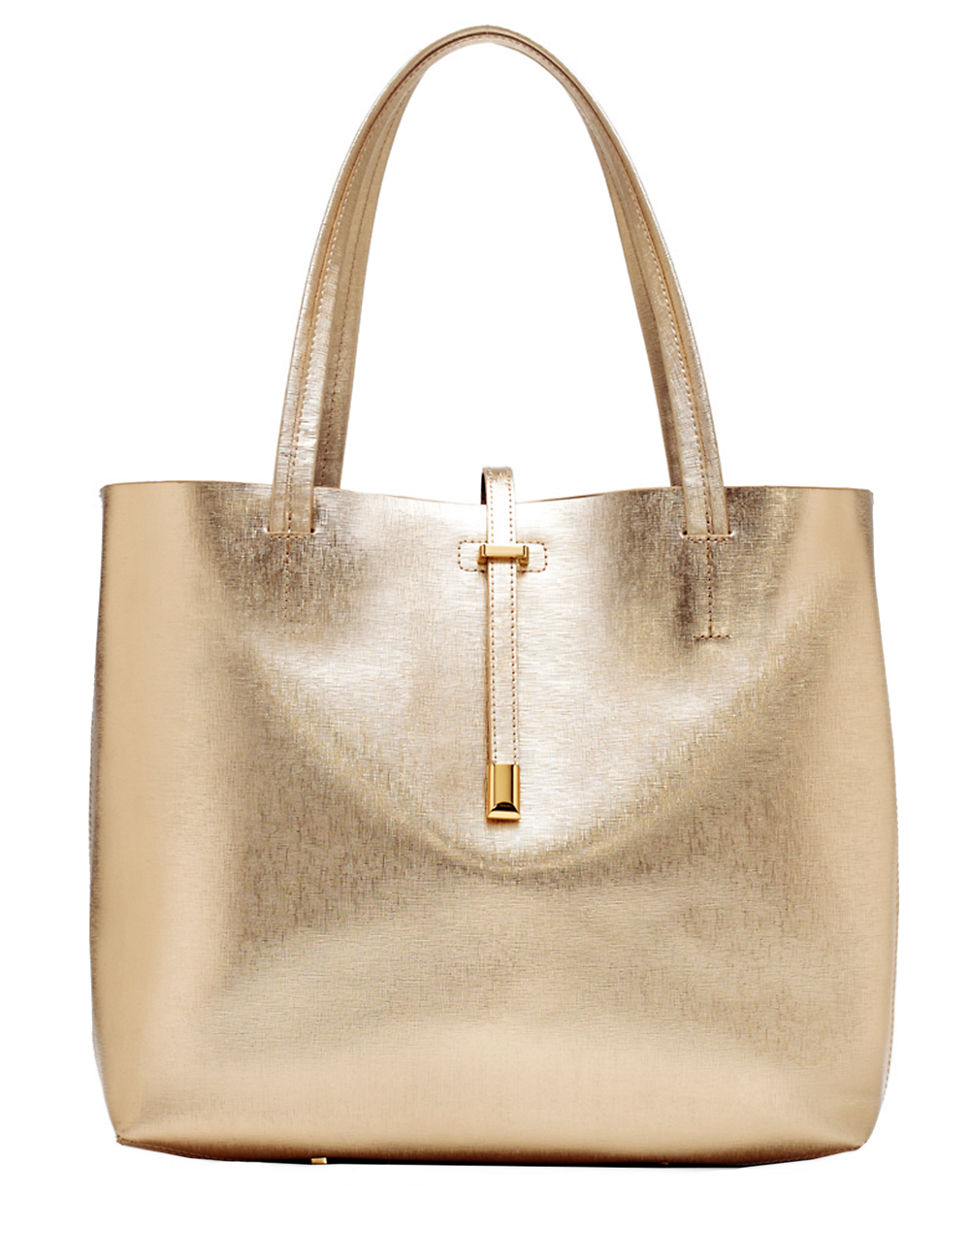 Lyst - Vince Camuto Leila Leather Tote Bag in Metallic